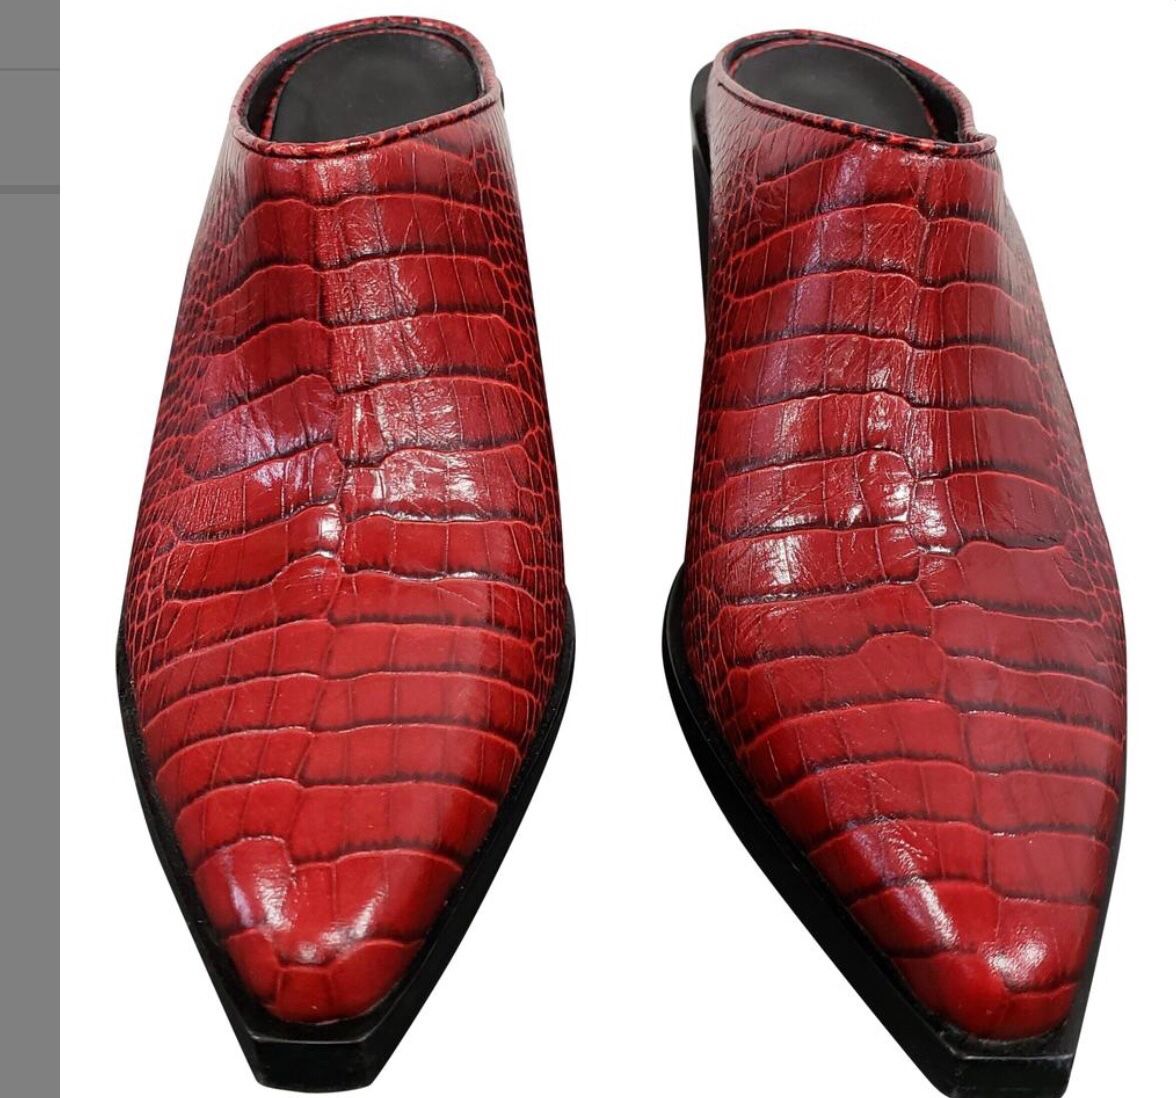 Rag & Bone Red croc-effect leather Mules boots/booties size 71/2 and 9 1/2